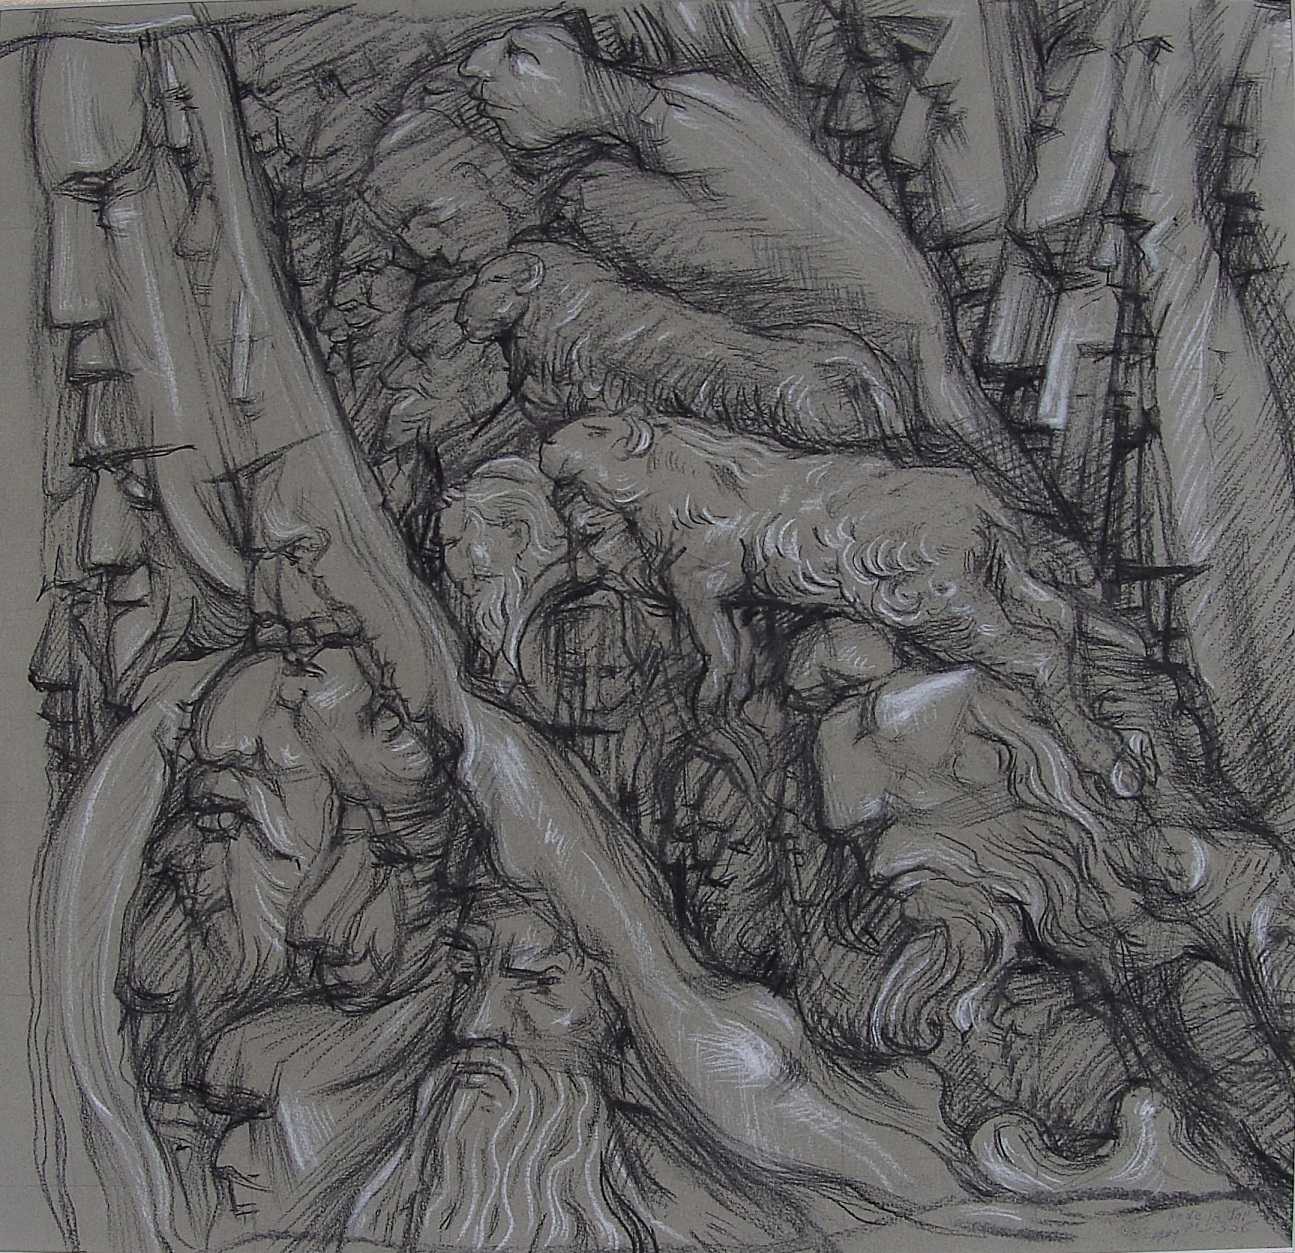 The Offering, 41x43, Paper, Pencil, 2004